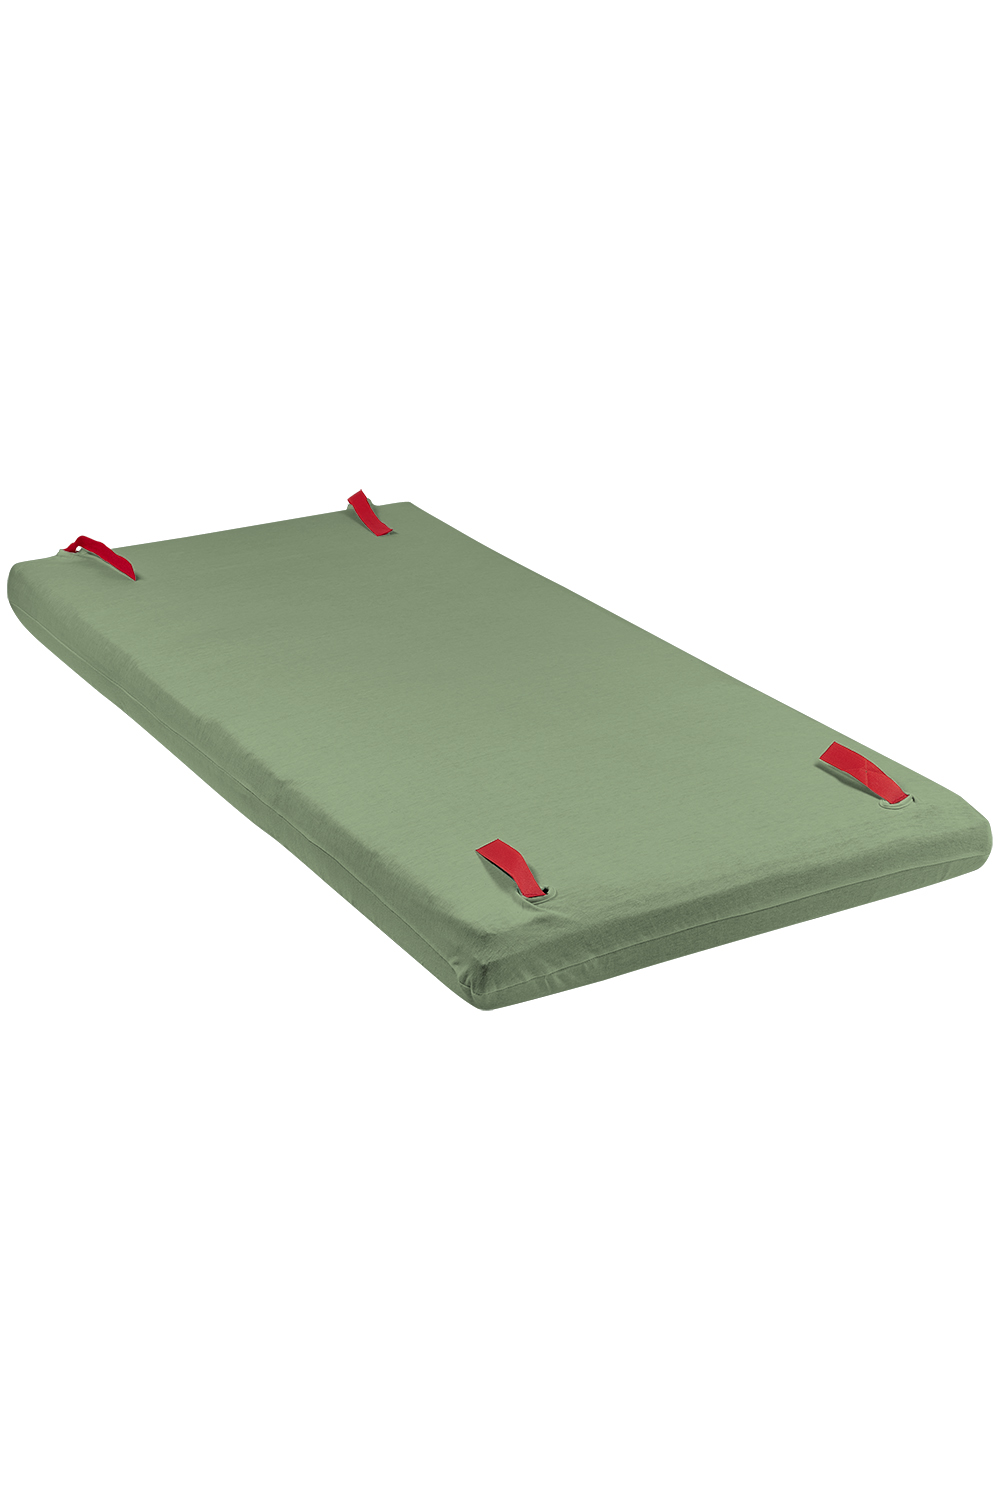 Jersey Campingbed Matrashoes DeLuxe - Forest Green - 60x120cm 